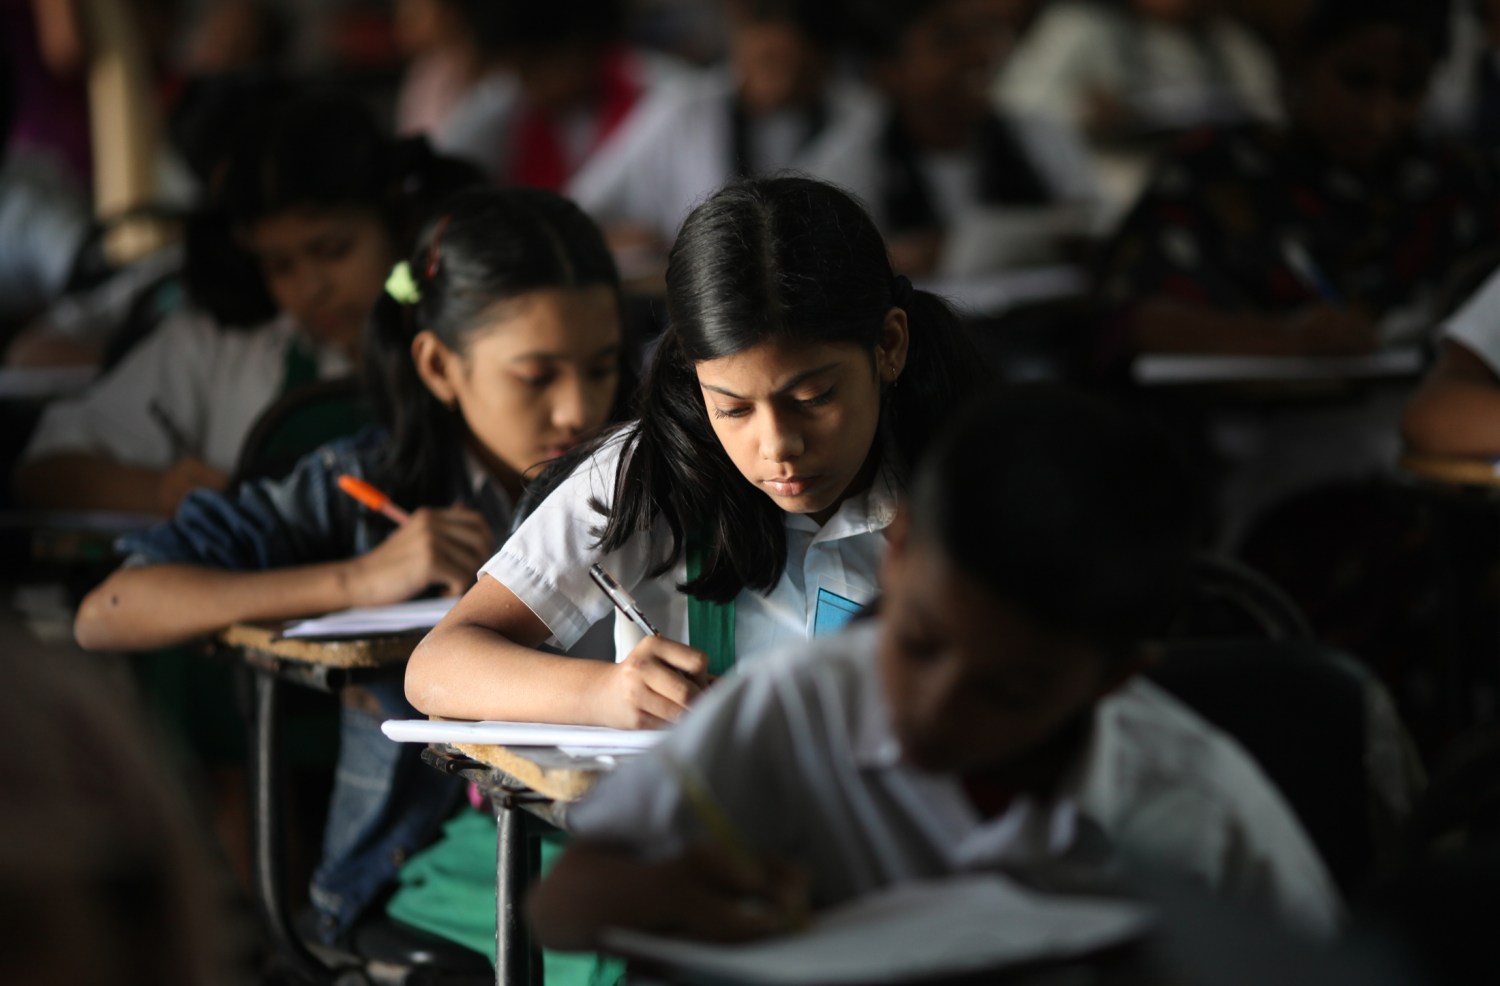 Ten-year-old pupils take part in a public examination at a school in Dhaka